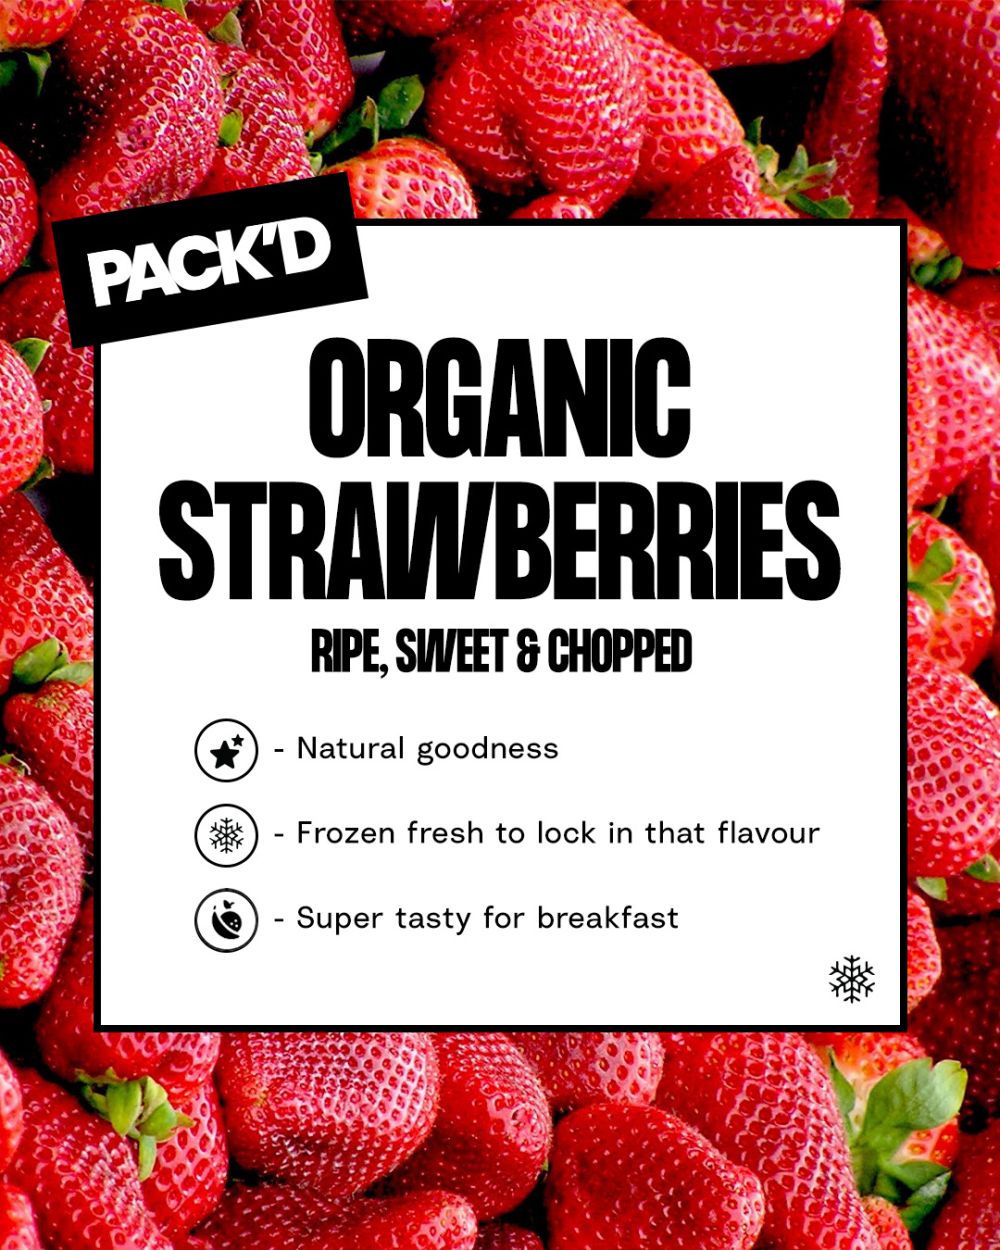 packd_fruits_strawberries.